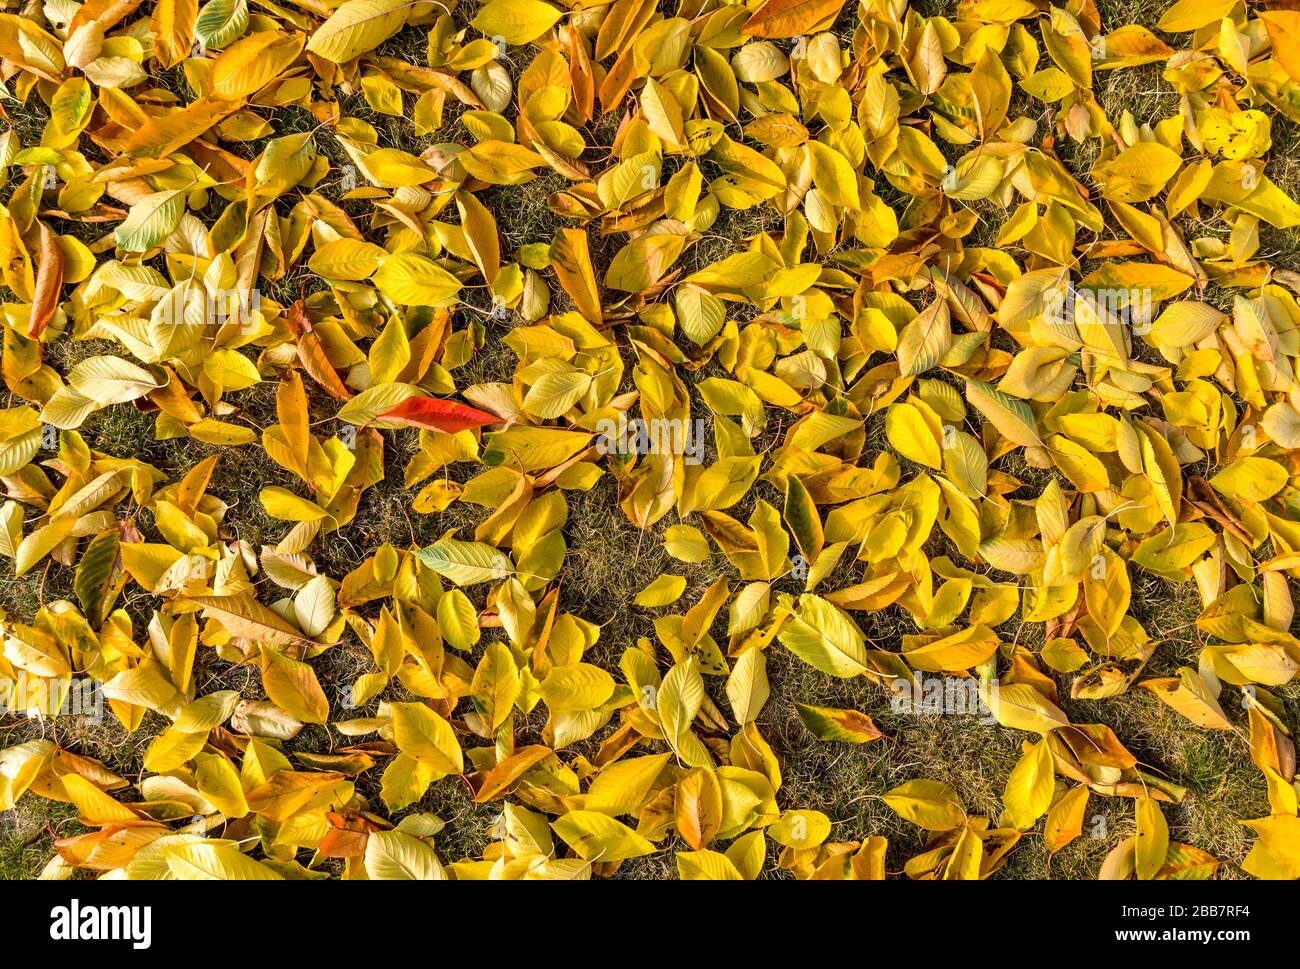 colorful autumn leaves from the cherry tree in the lawn with a red leaf Stock Photo